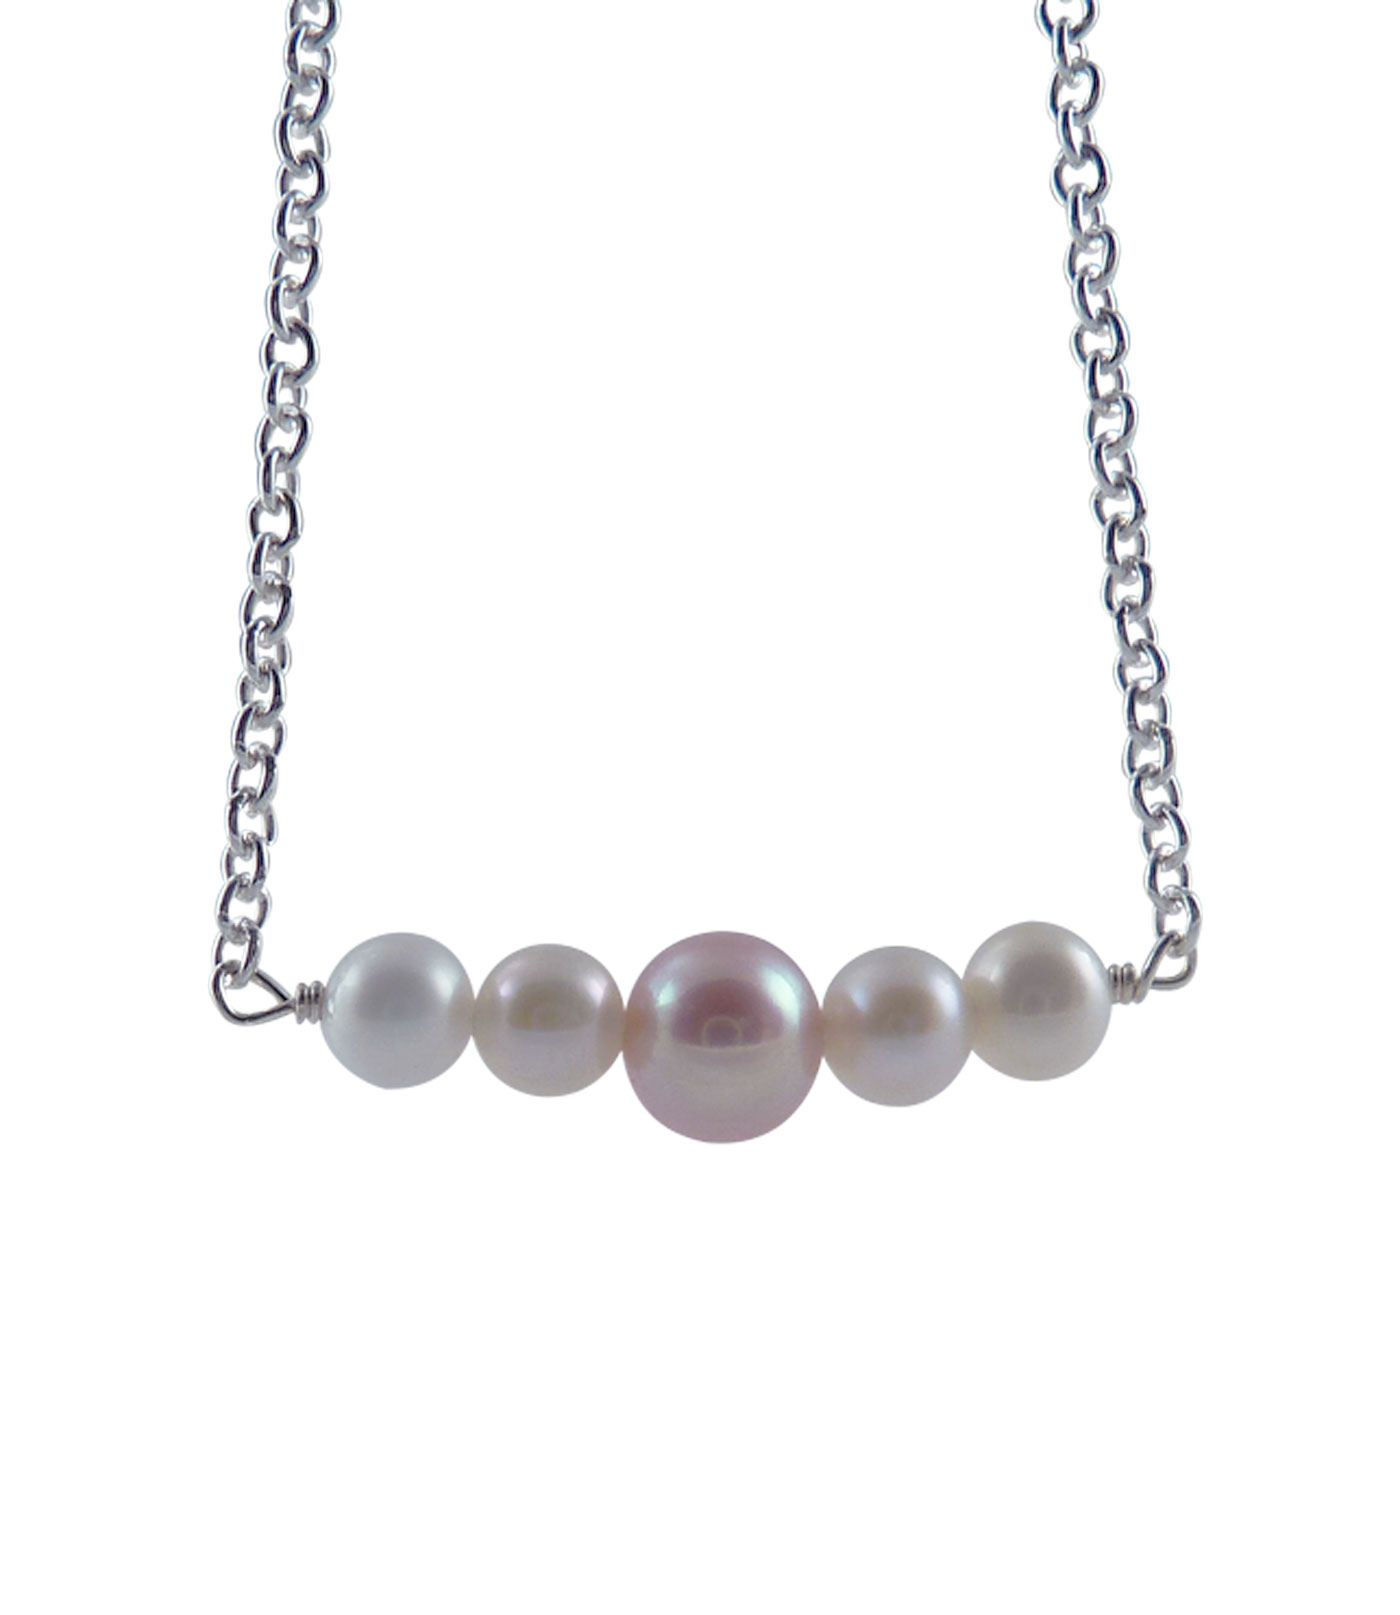 Pearl necklace white pearls on chain. Modern pearl jewelry